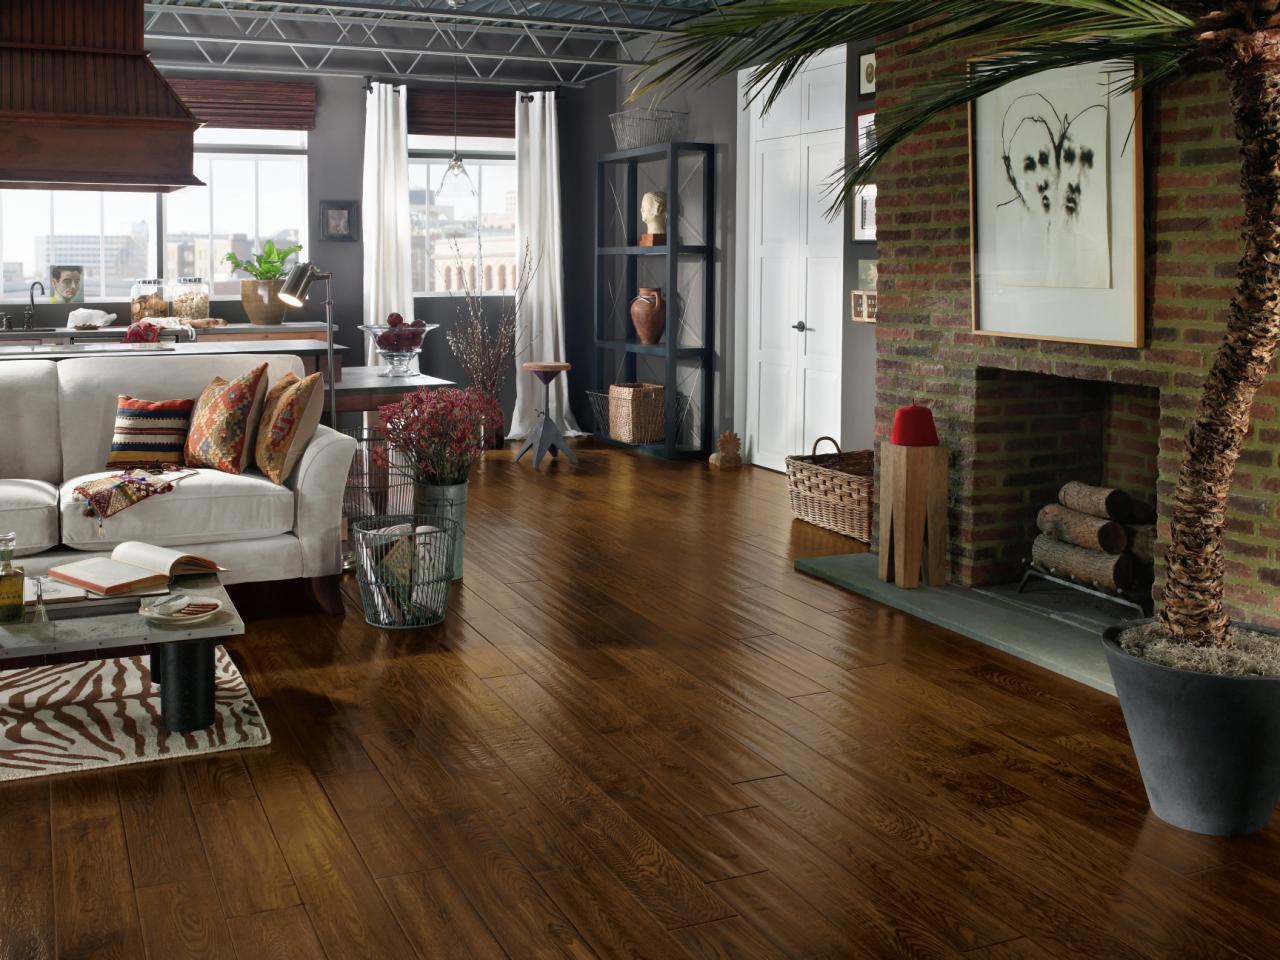 Living Room Decorating Ideas With Wood Floors